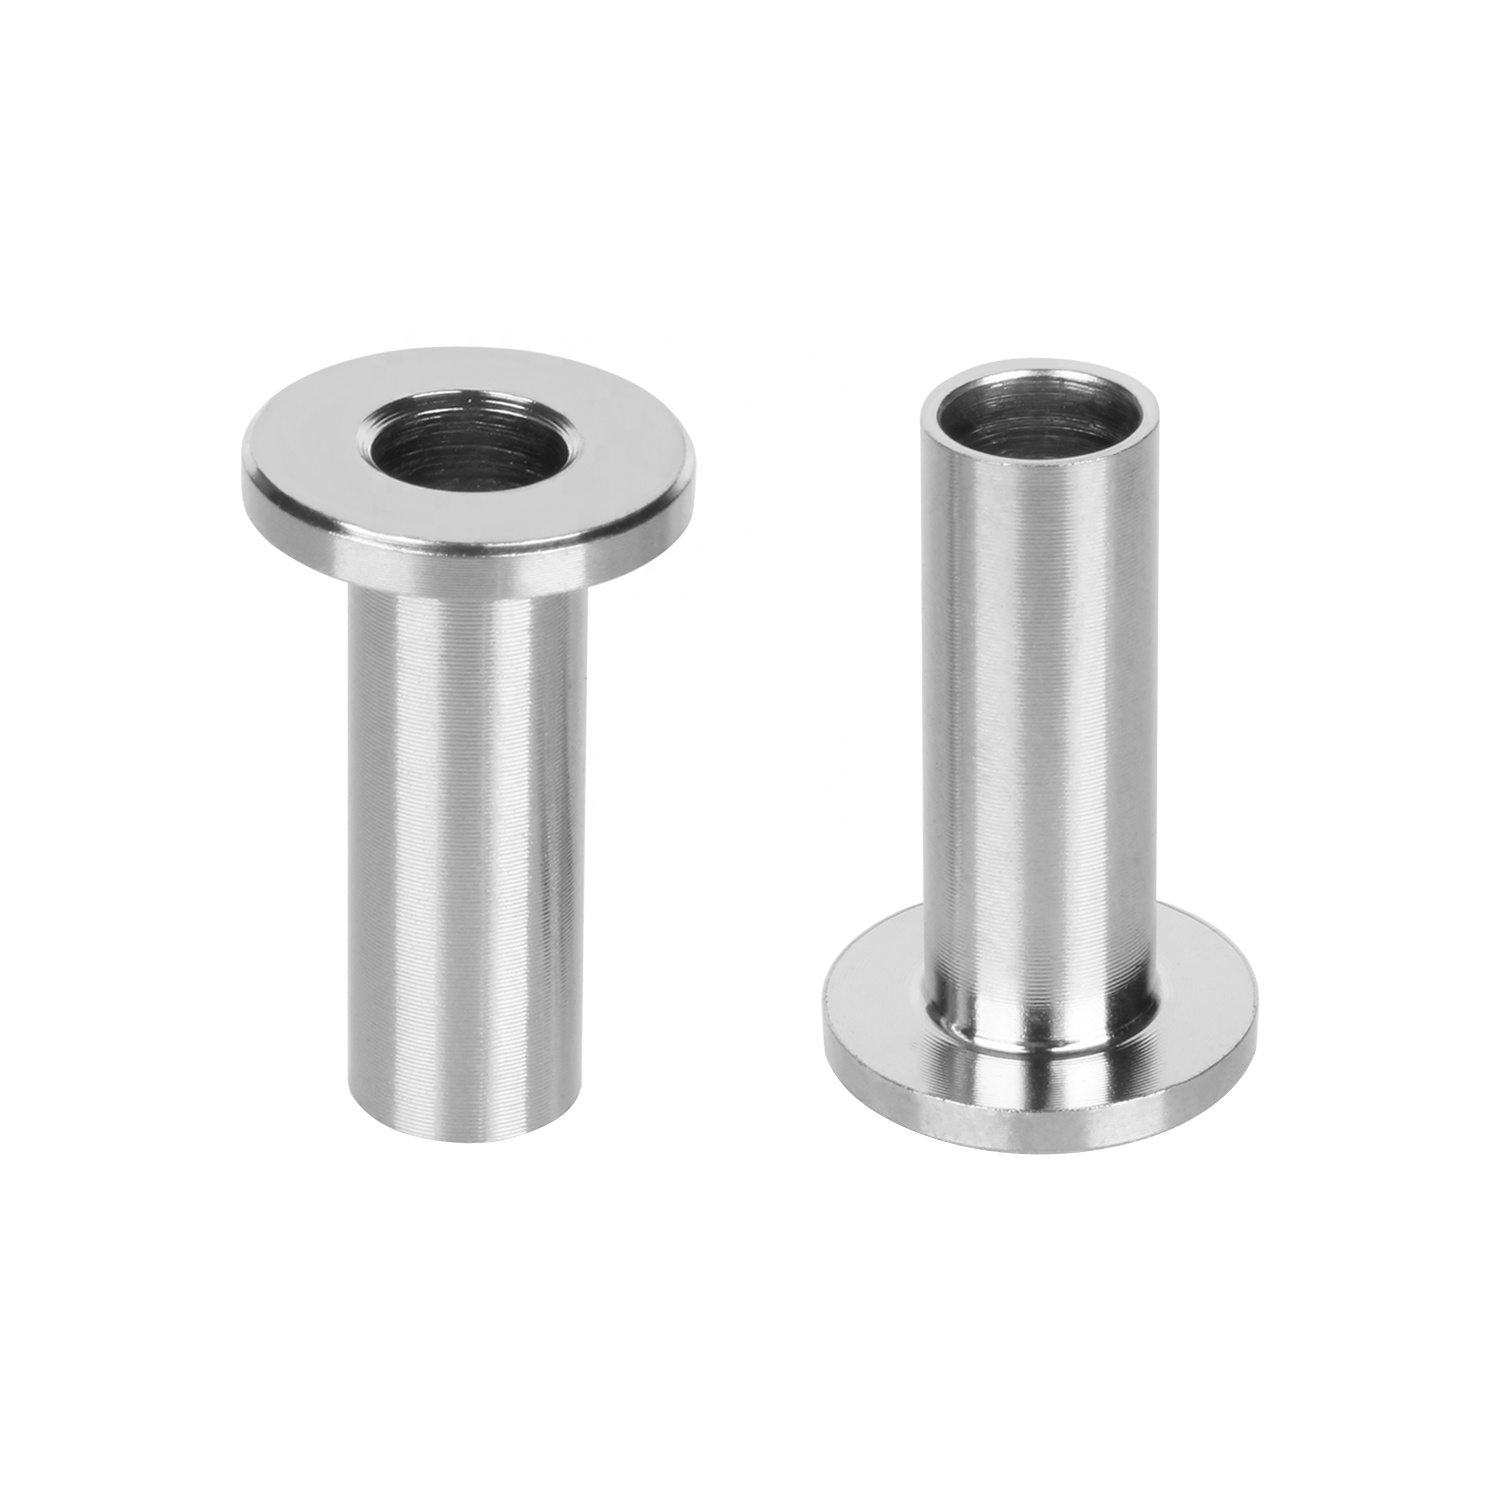 Hot Sale Cable Railing Kit Hardware 316 Stainless Steel Protective sleeves